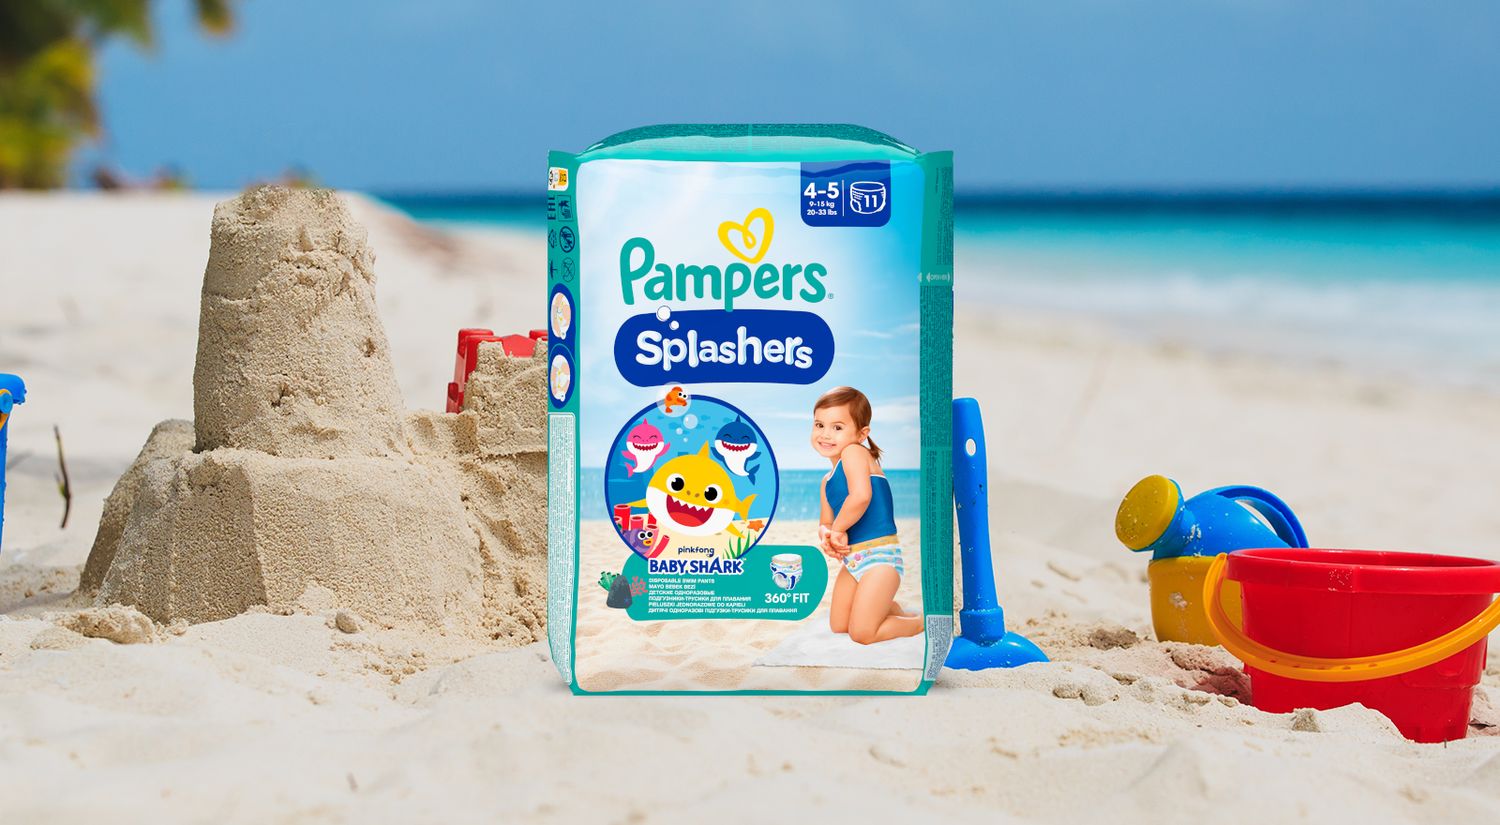 carrefour pampers premium care 3 pants